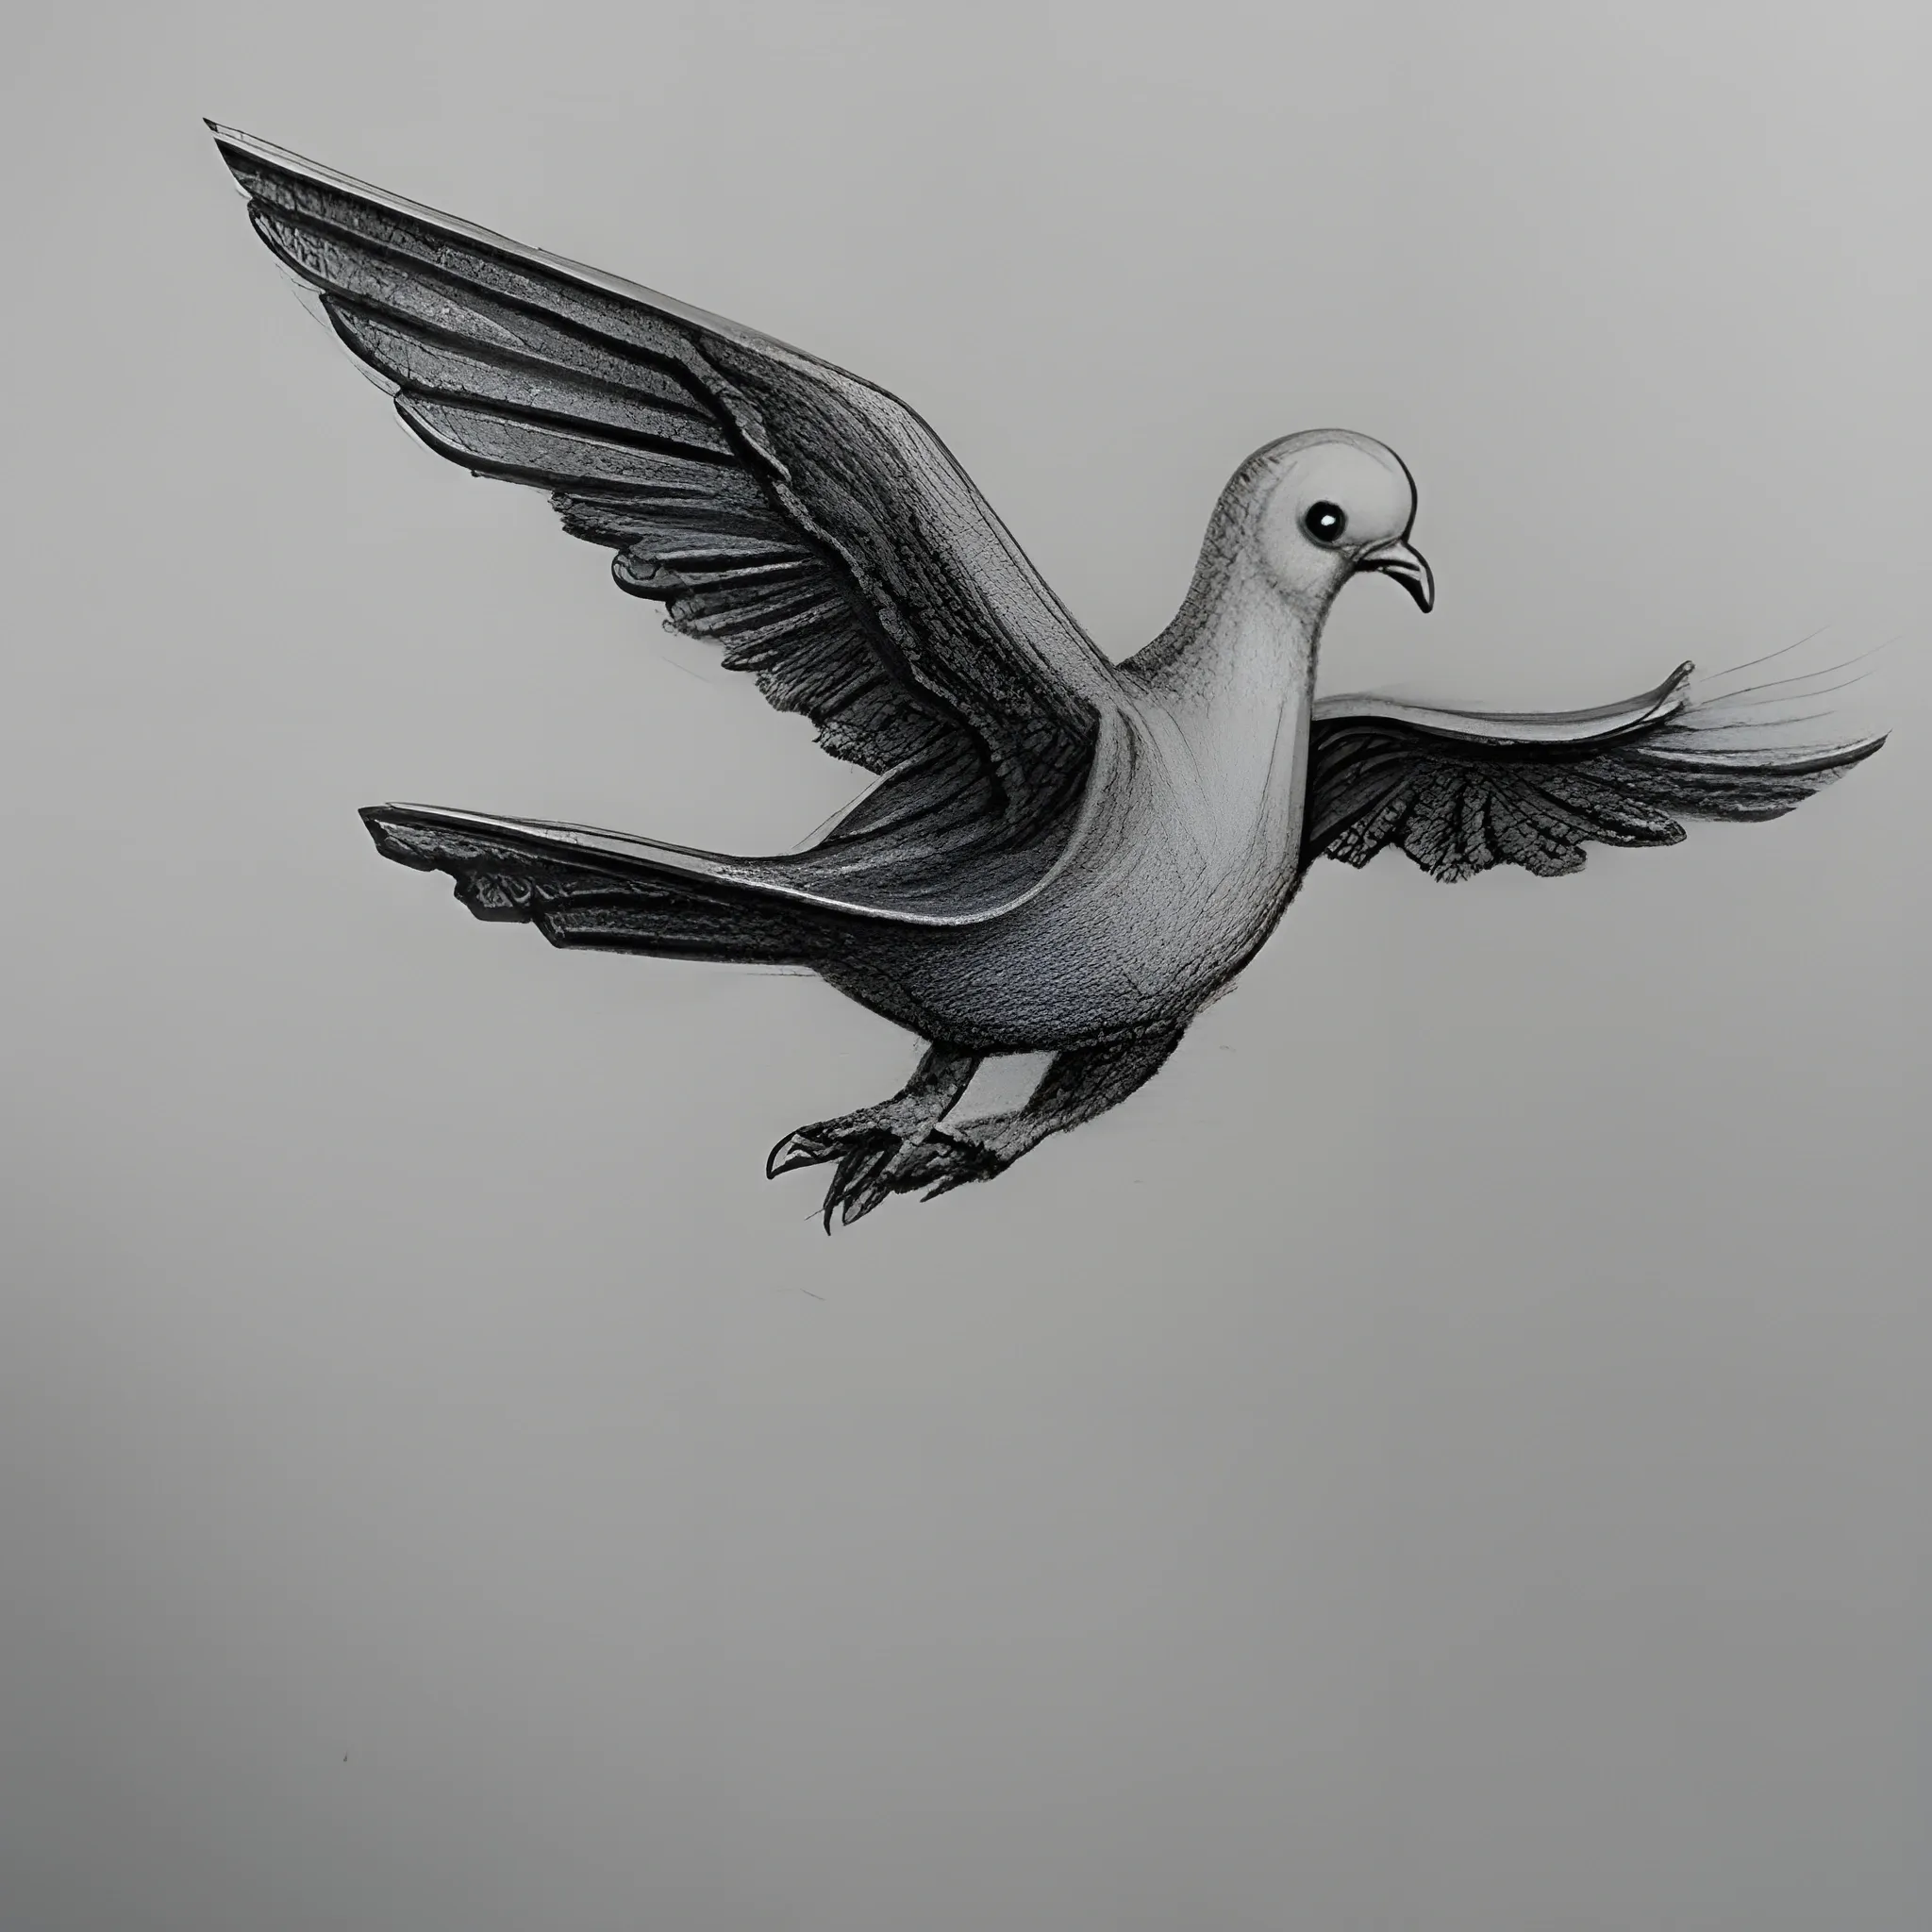 how tO draw flying pigeon easy/pigeon drawing - YouTube